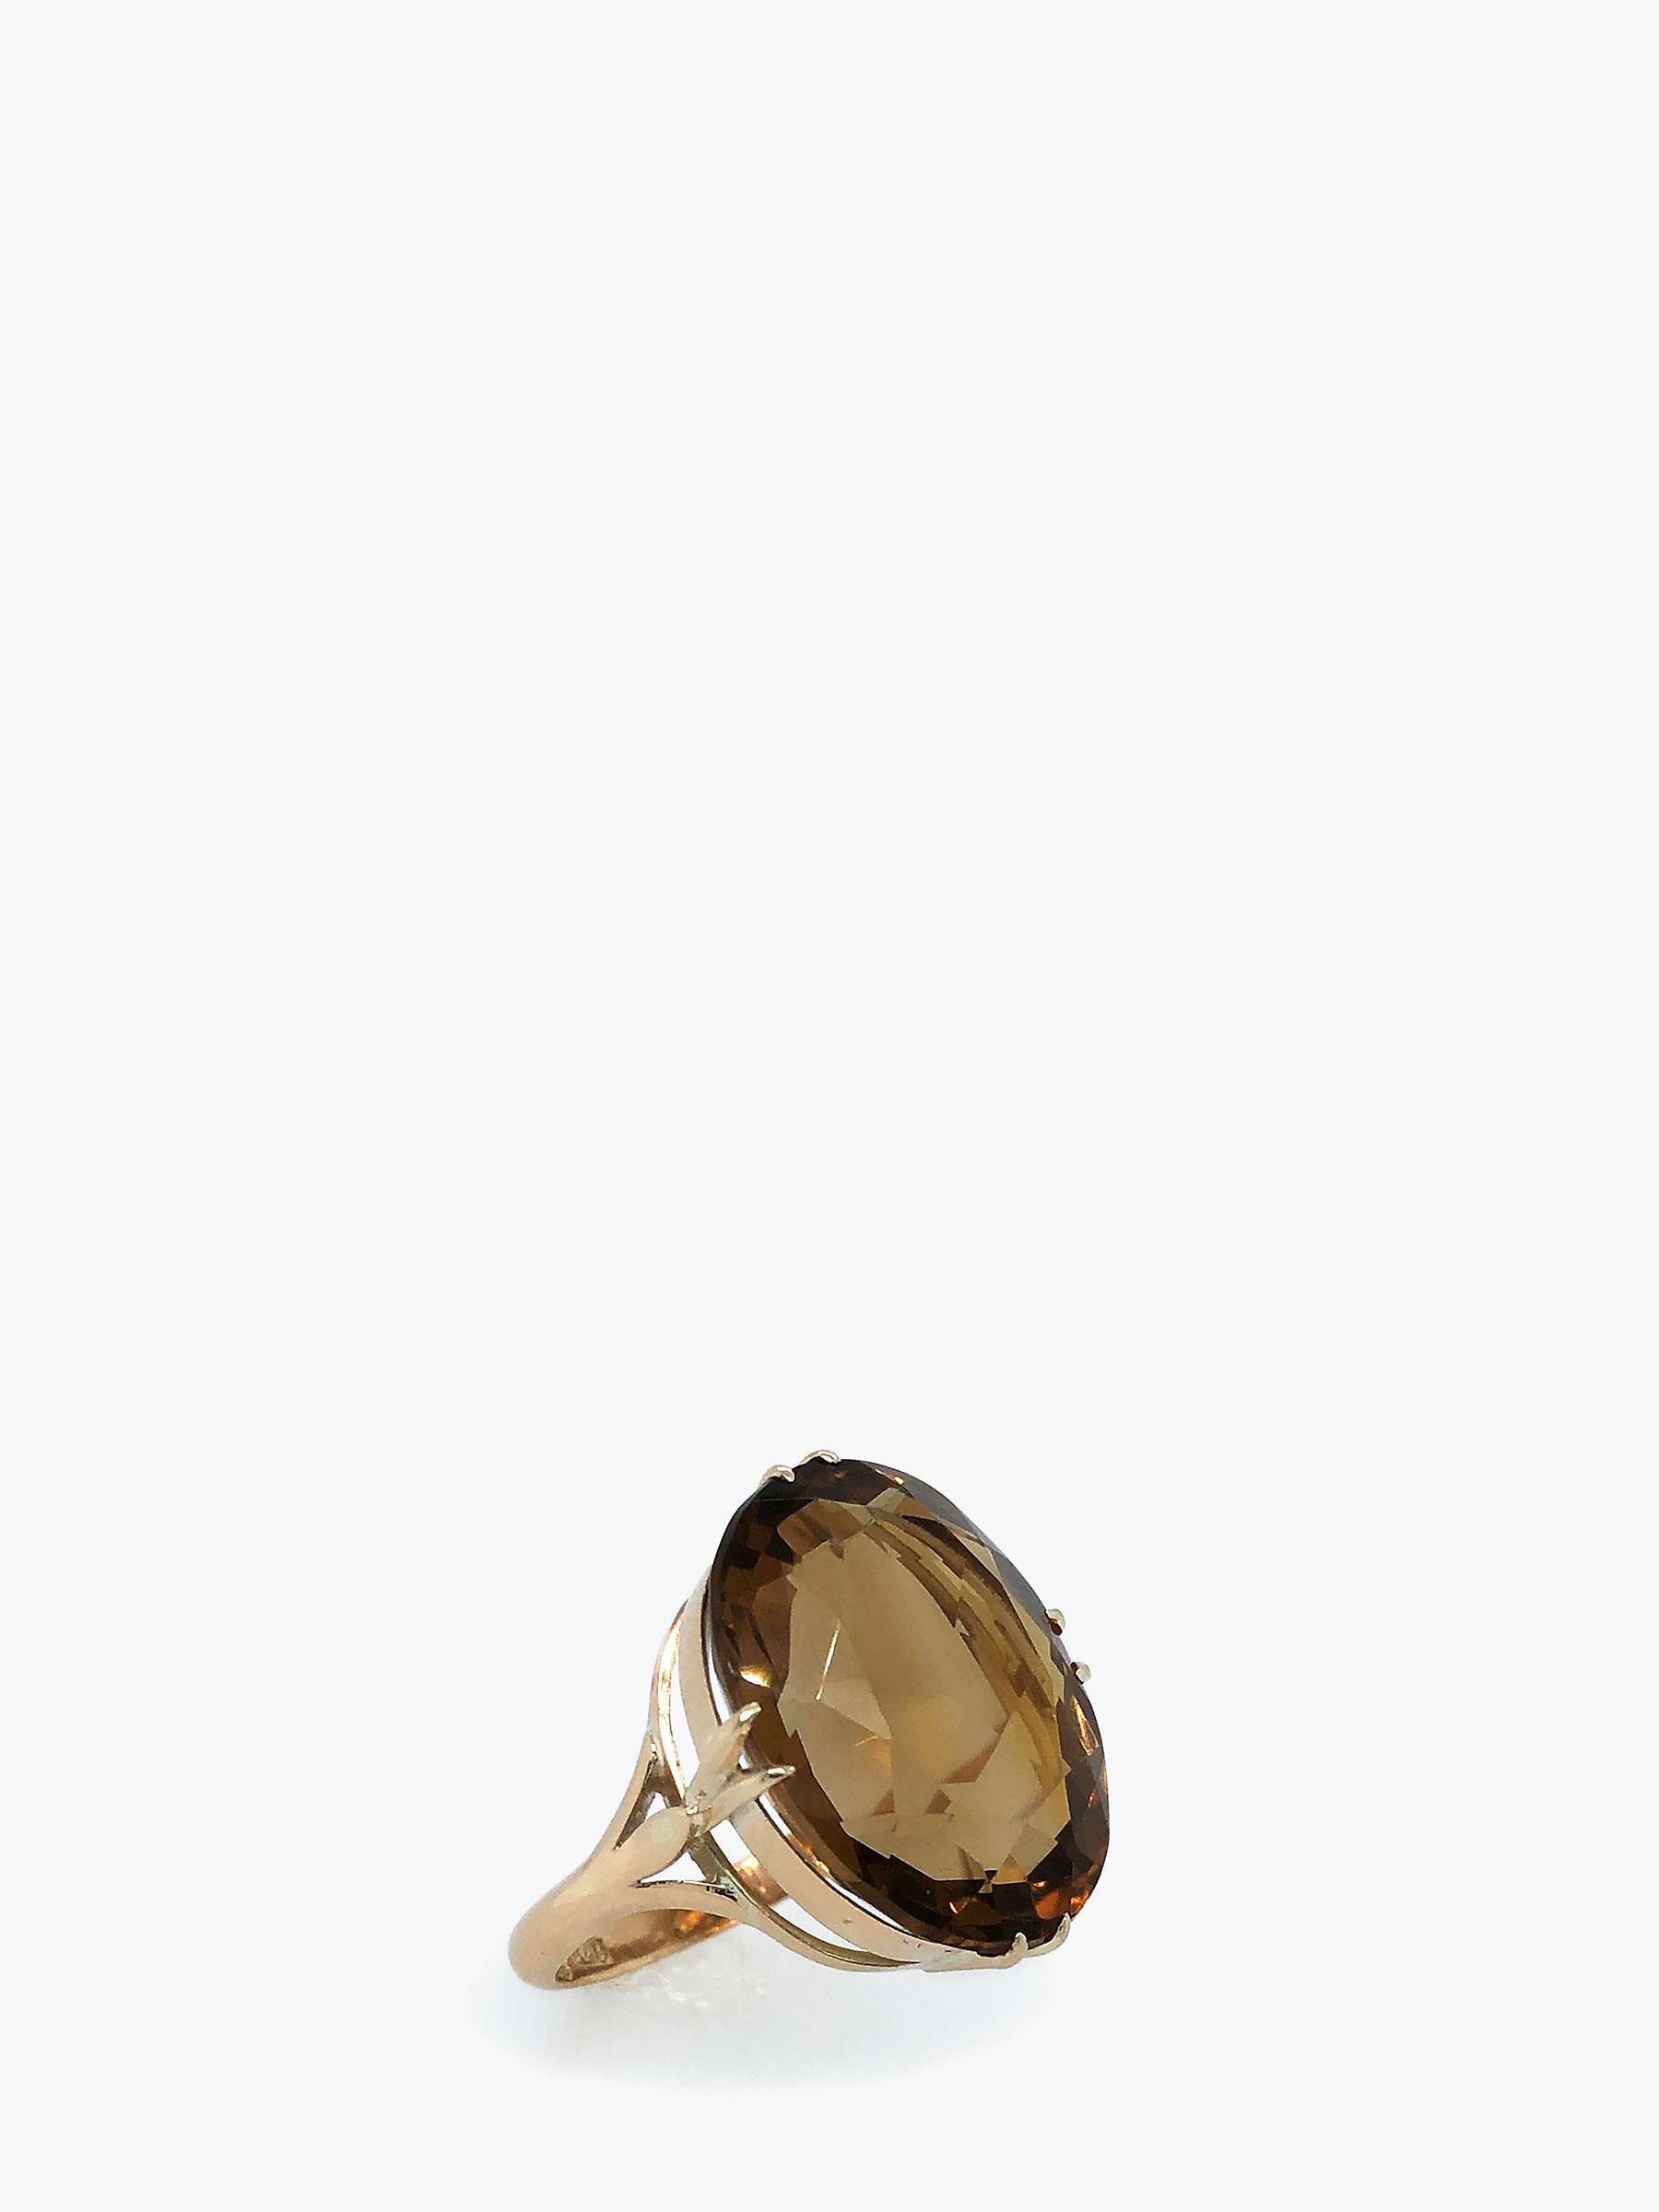 Buy VF Jewellery 9ct Yellow Gold Smoky Quartz Second Hand Ring Online at johnlewis.com